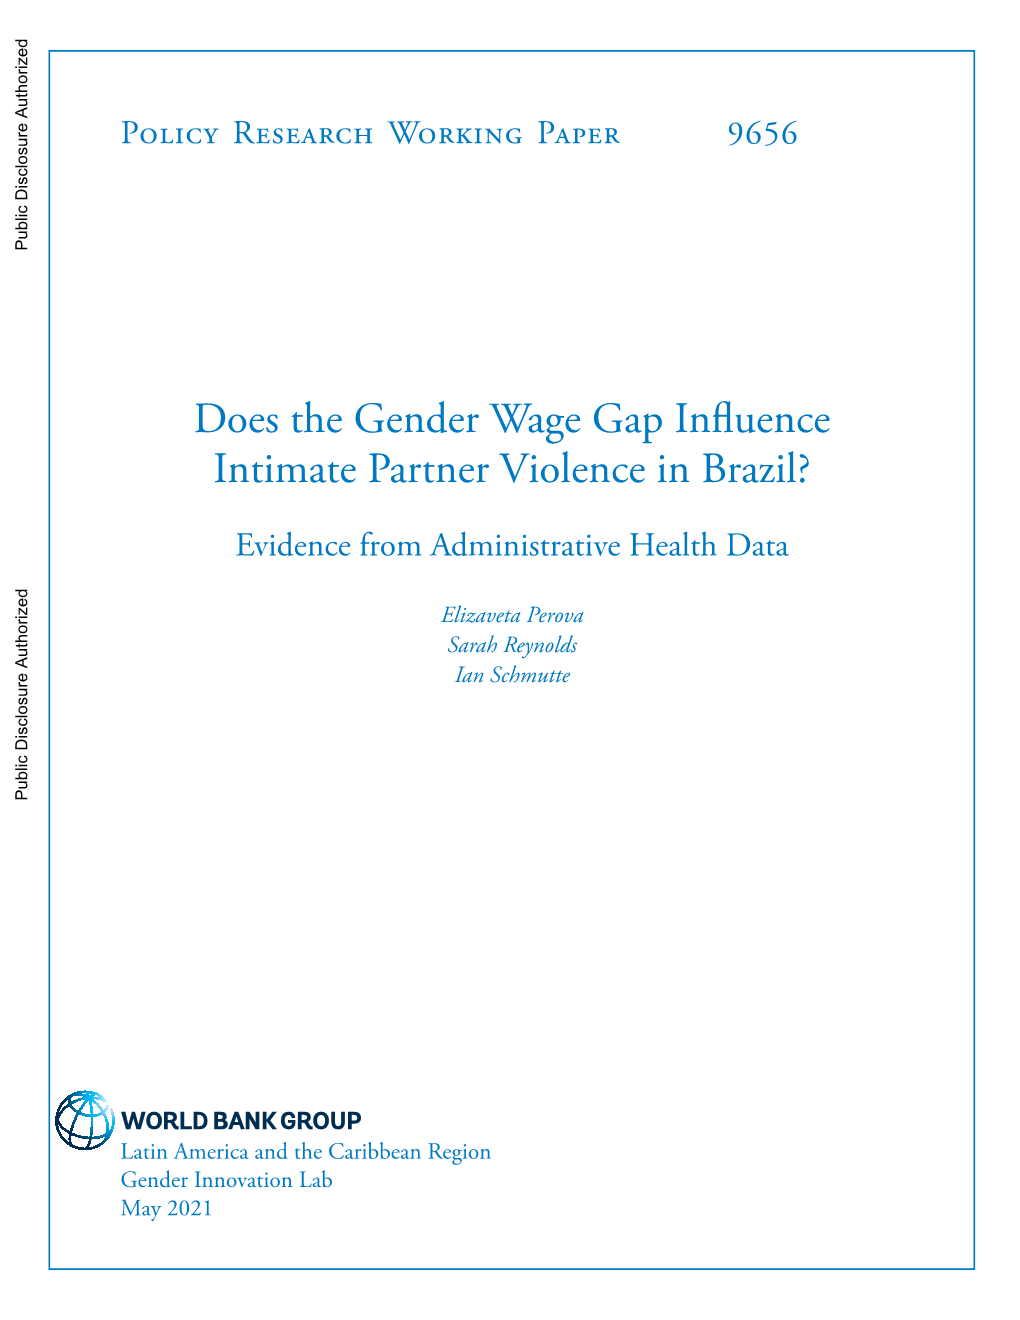 Does the Gender Wage Gap Influence Intimate Partner Violence in Brazil?